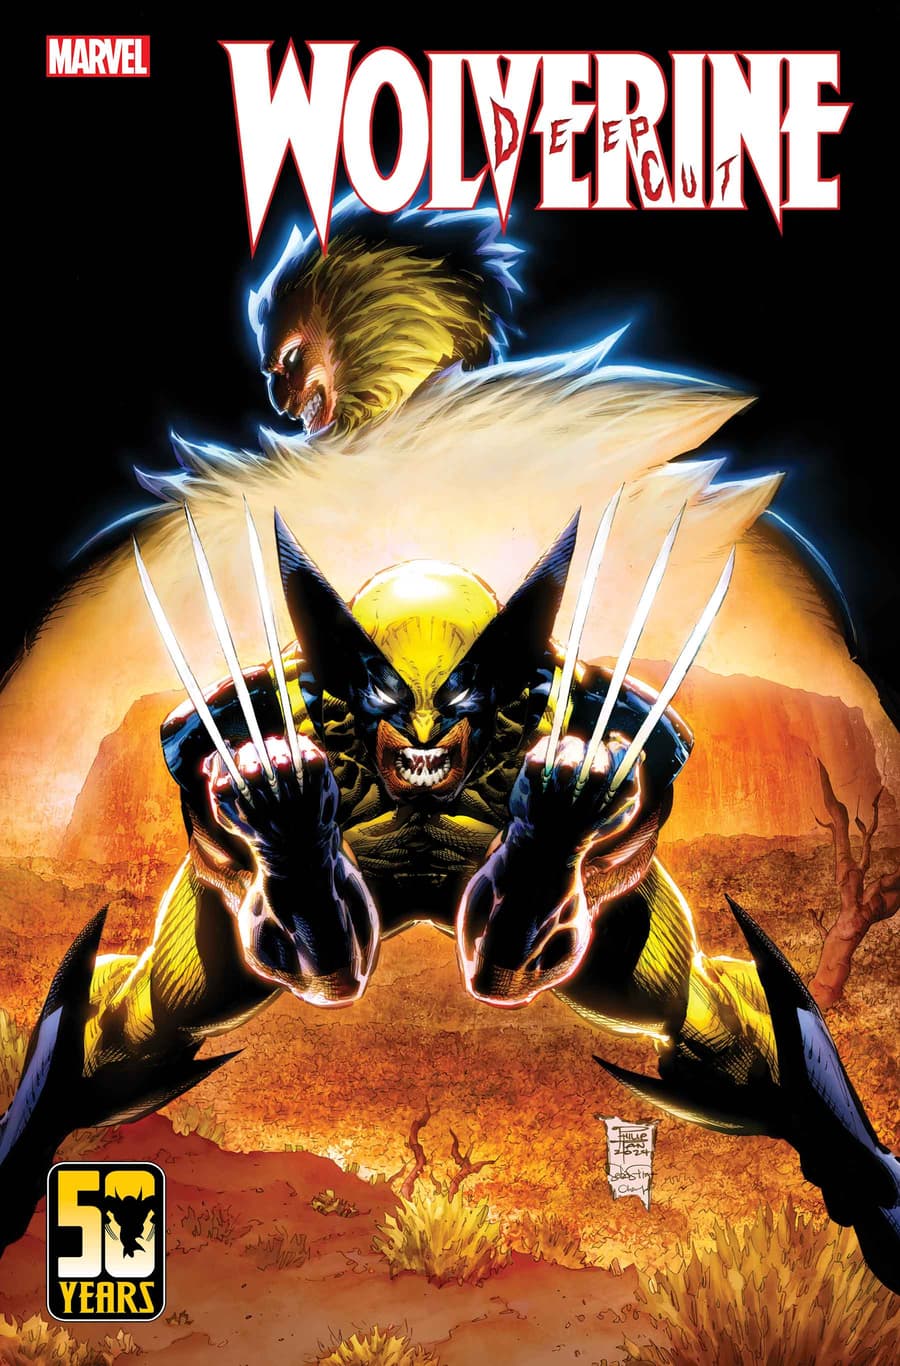 WOLVERINE: DEEP CUT #1 cover by Philip Tan